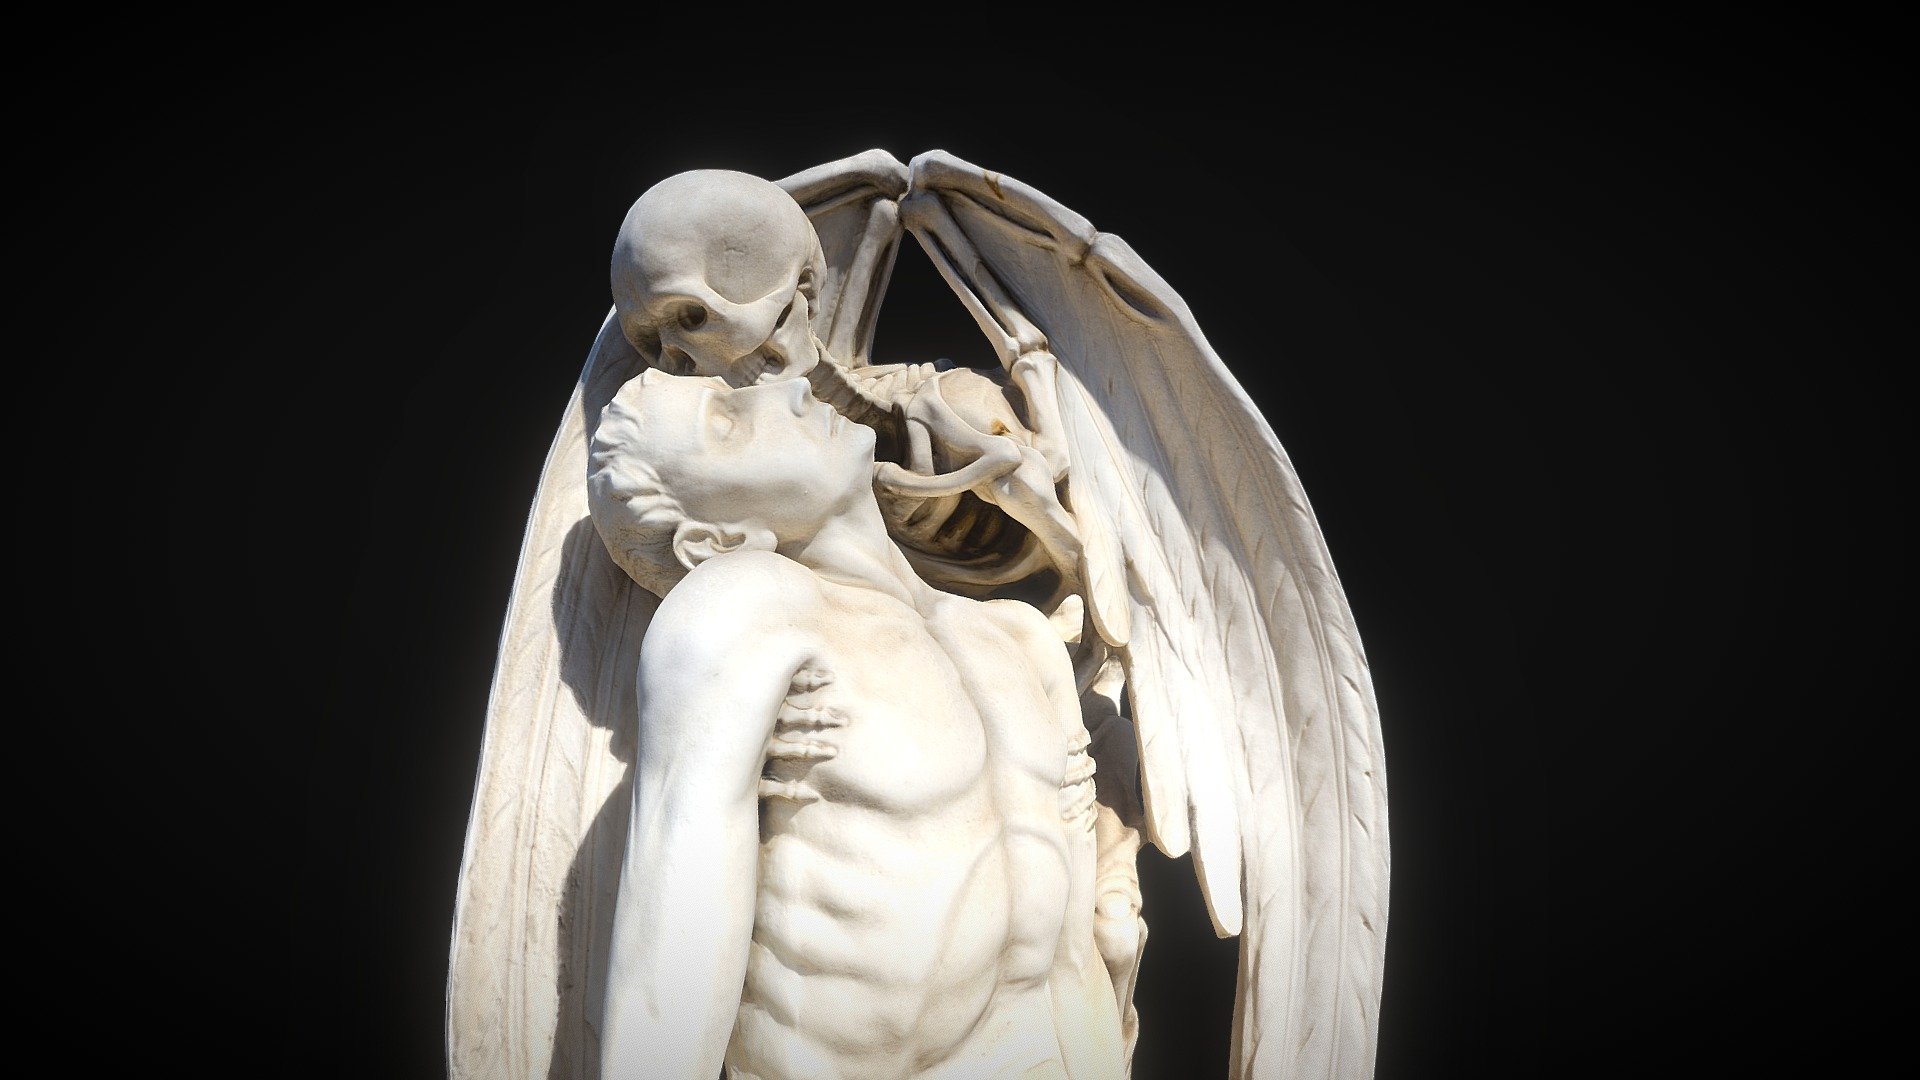 Grave The Kiss of Death by Jaume Barba, Marble, 1930.
Cementerio de Poblenou, Barcelona.

Made with Reality Capture, and detailing with Zbrush, Maya and Photoshop. 
Send an email if you wanna use this model for anything non-profit to EternalEchoesVR@gmail.com

Hecho con Reality Capture y algunos detalles con Zbrush, Maya y Photoshop. Envia un correo electrónico a eternalechoesvr@gmail.com si deseas usar este modelo para cualquier organización sin fines de lucro - The Kiss of Death - 3D model by EternalEchoesVR 3d model